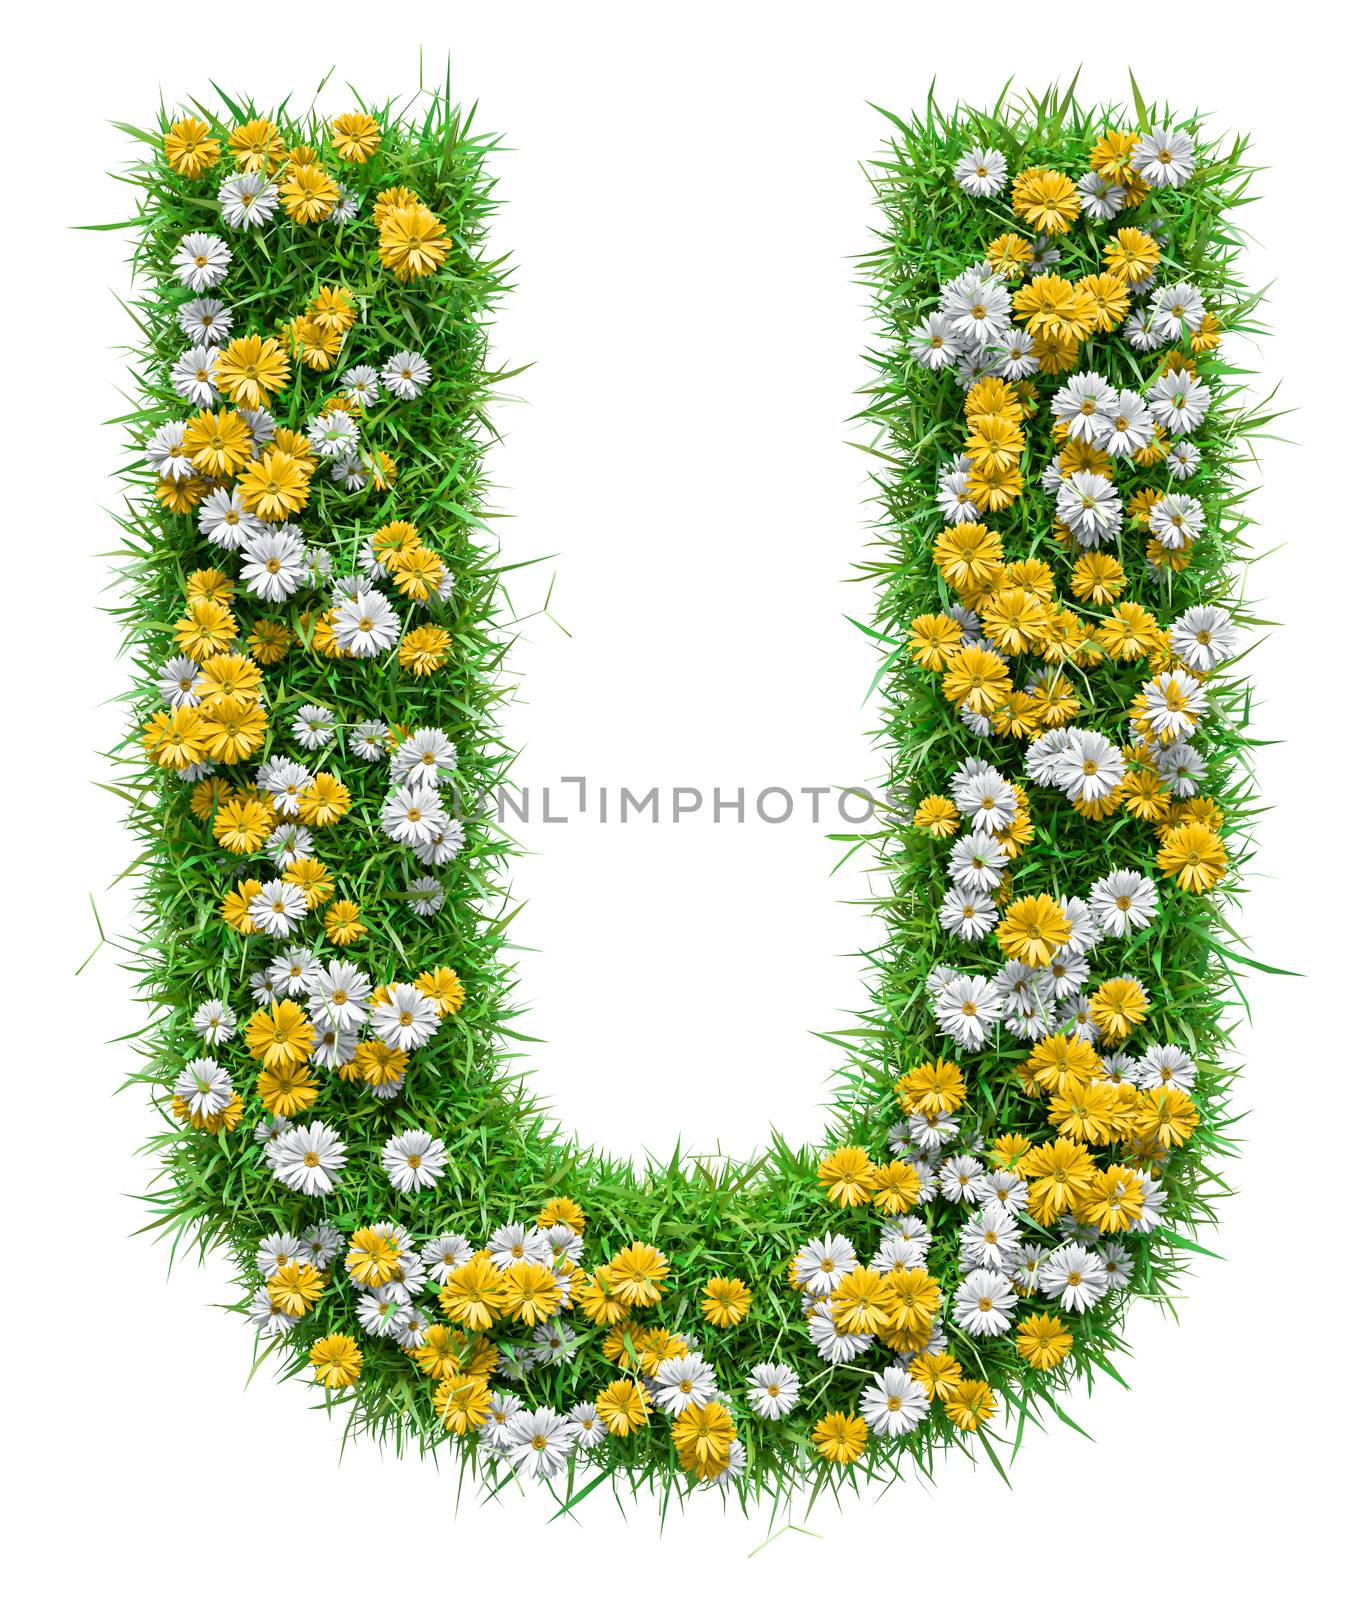 Letter U Of Green Grass And Flowers. Isolated On White Background. Font For Your Design. 3D Illustration